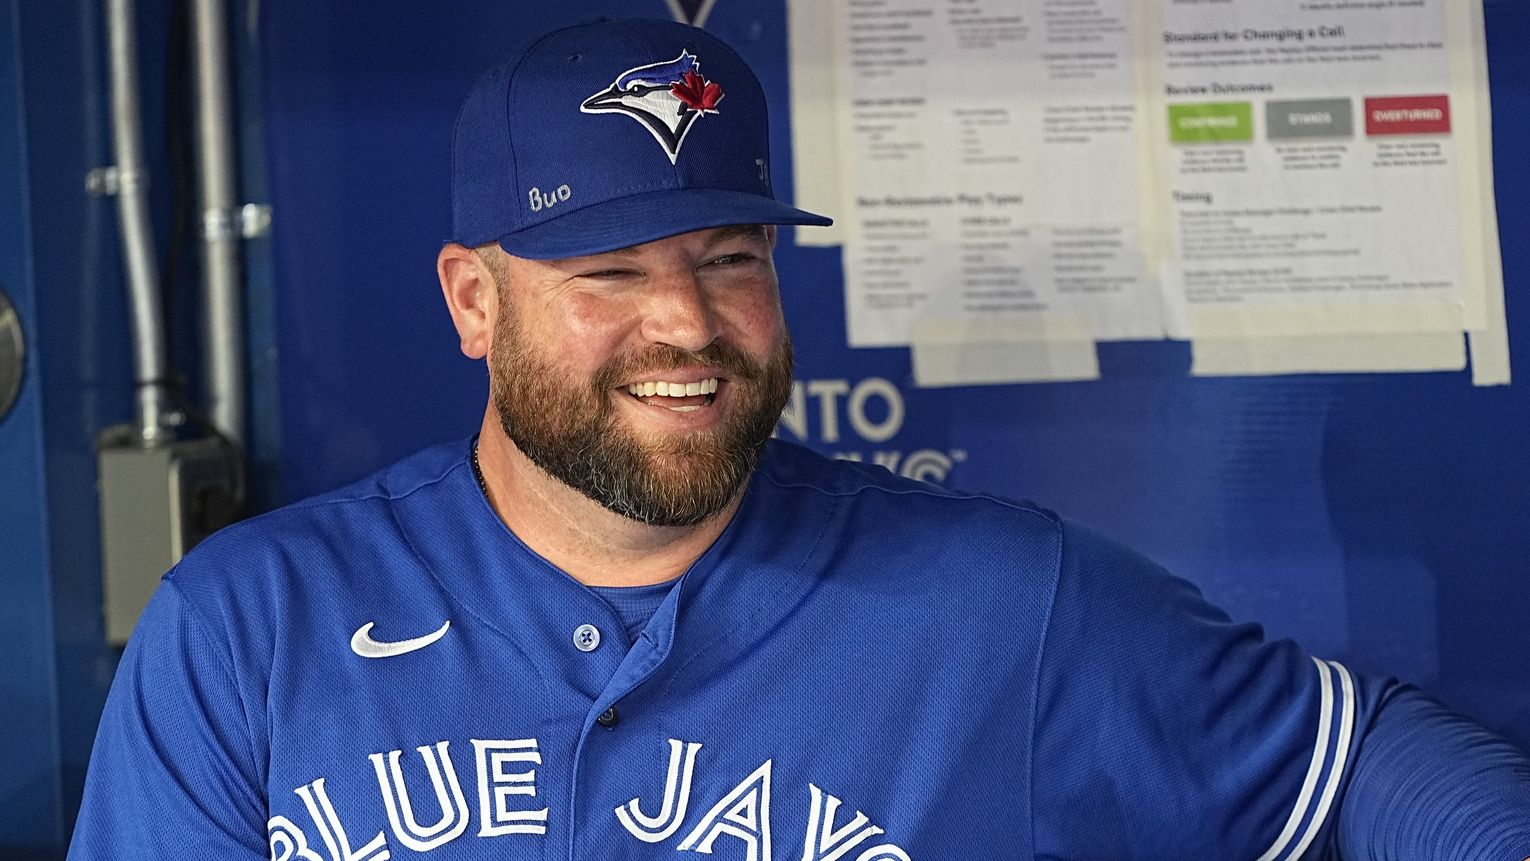 Blue Jays manager John Schneider saves woman from choking at